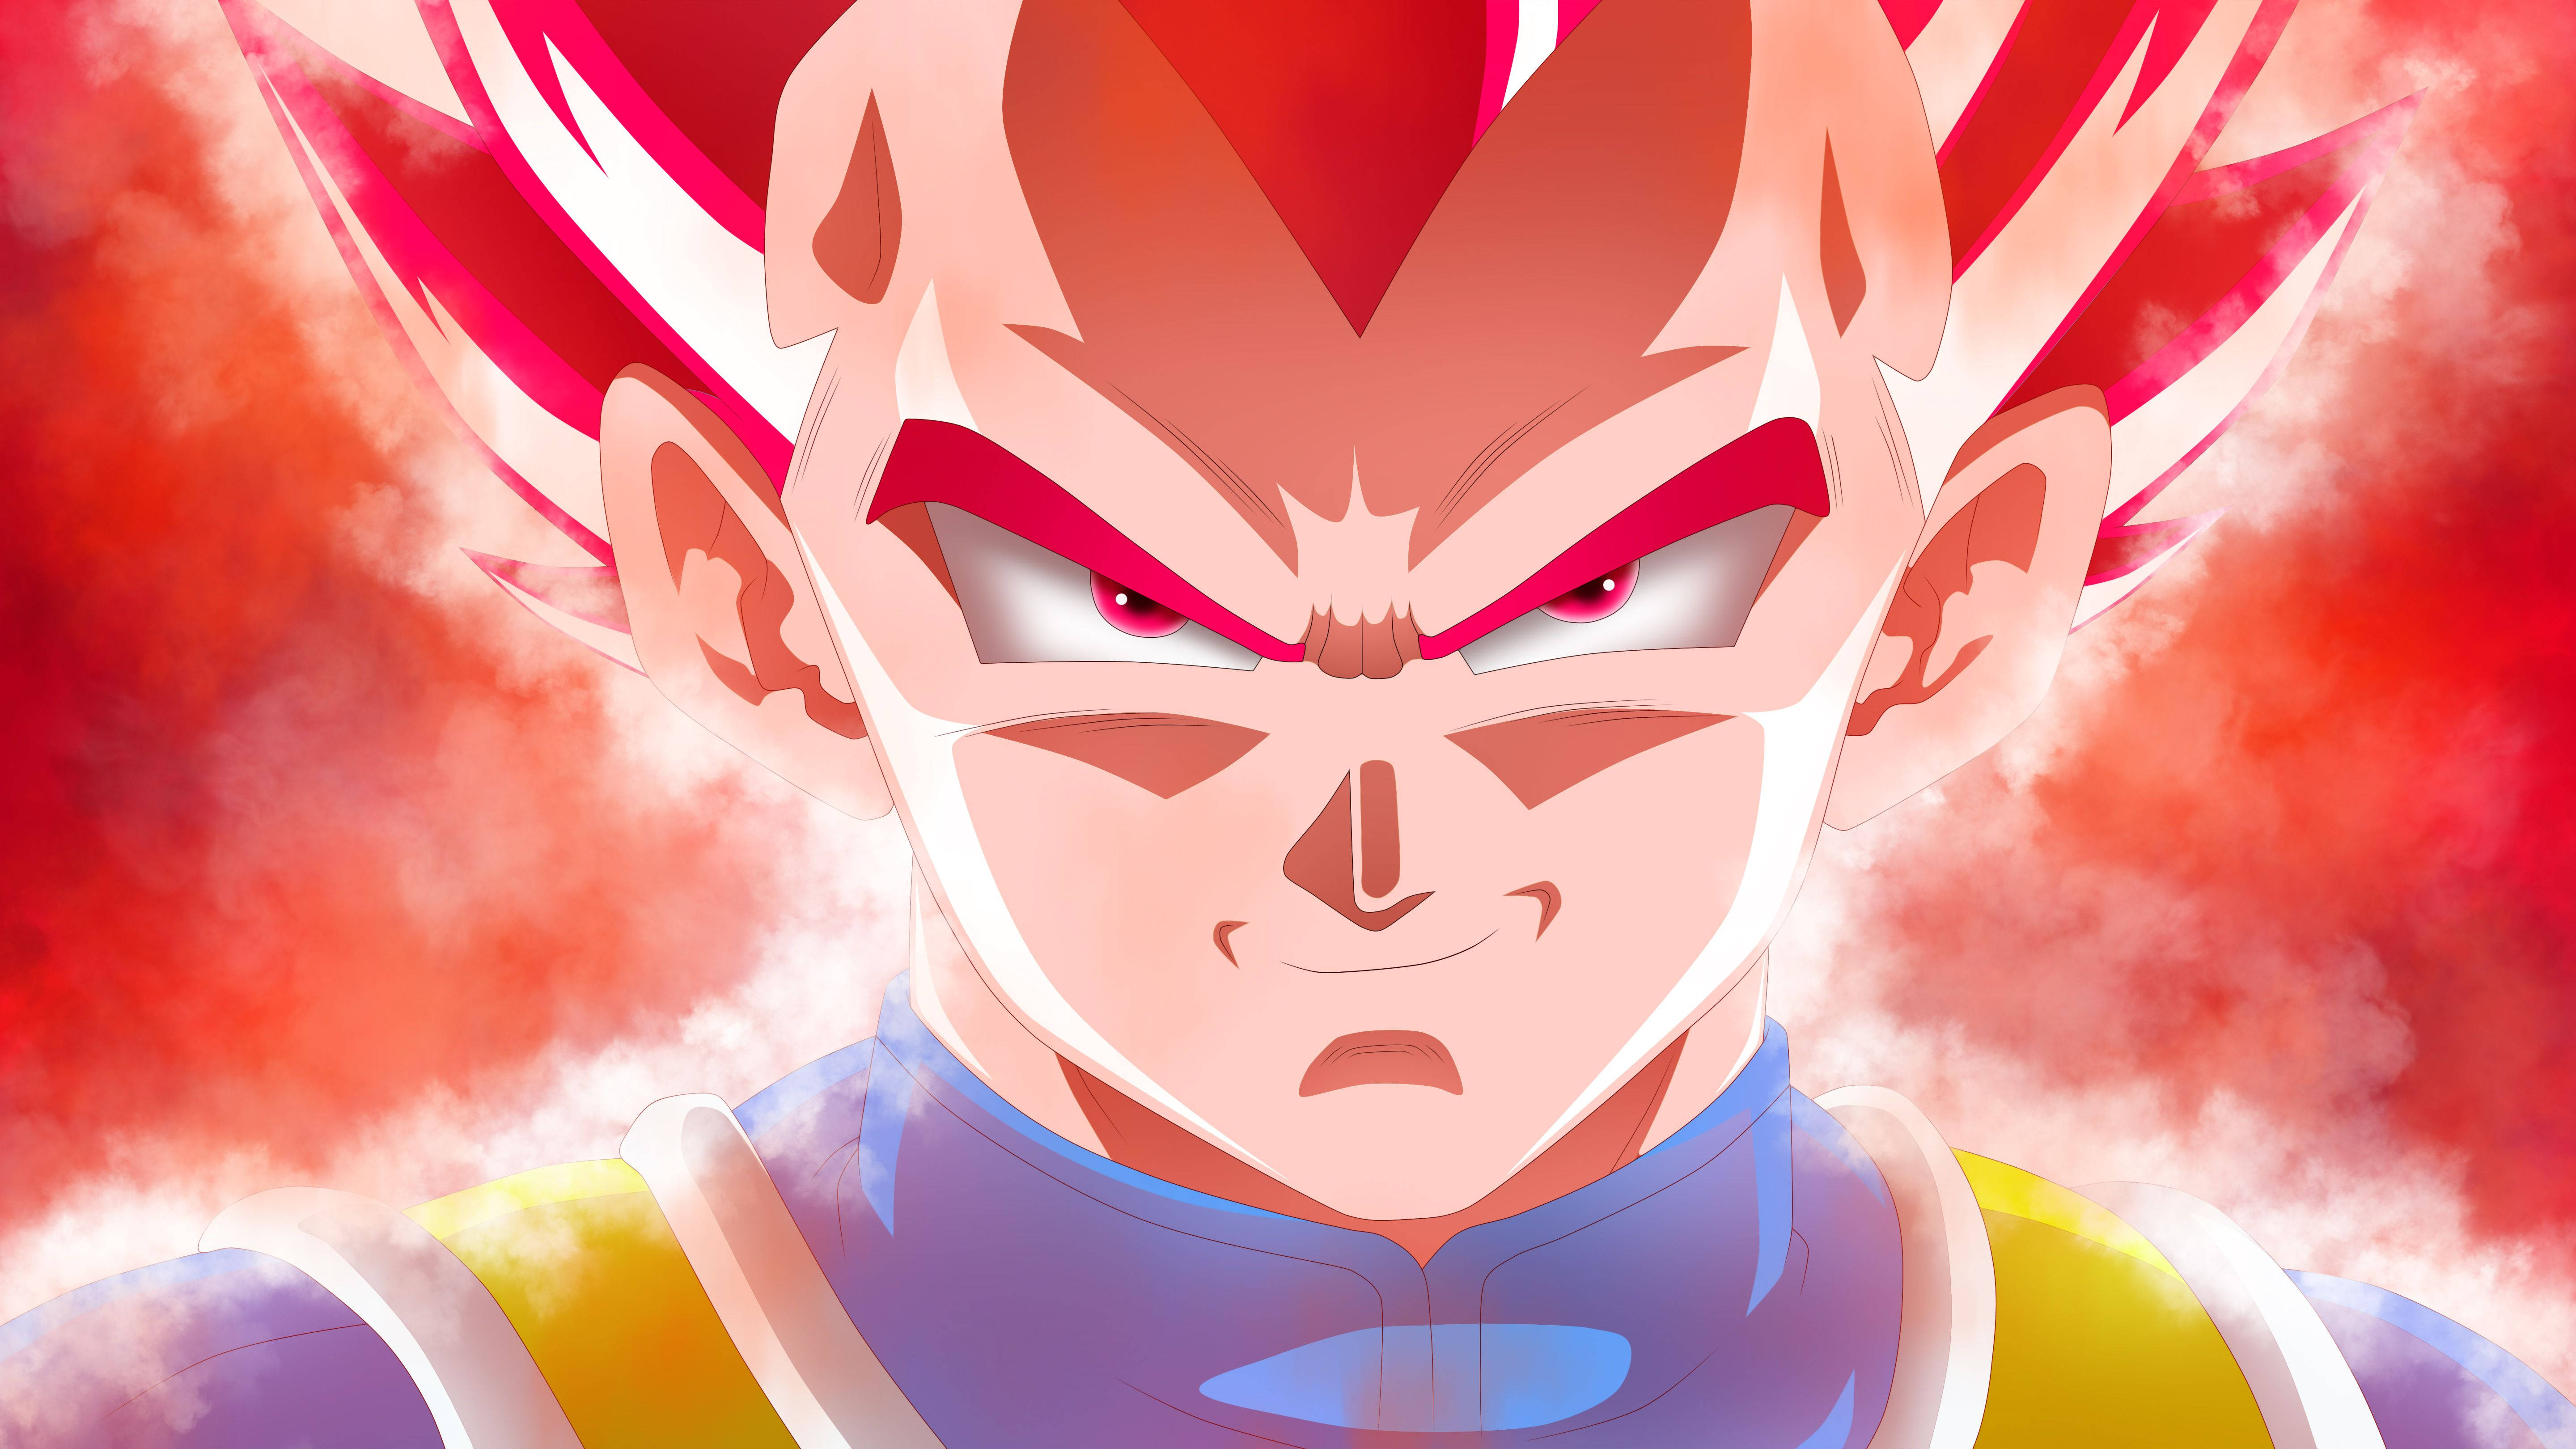 Red Vegeta Background Cover Background